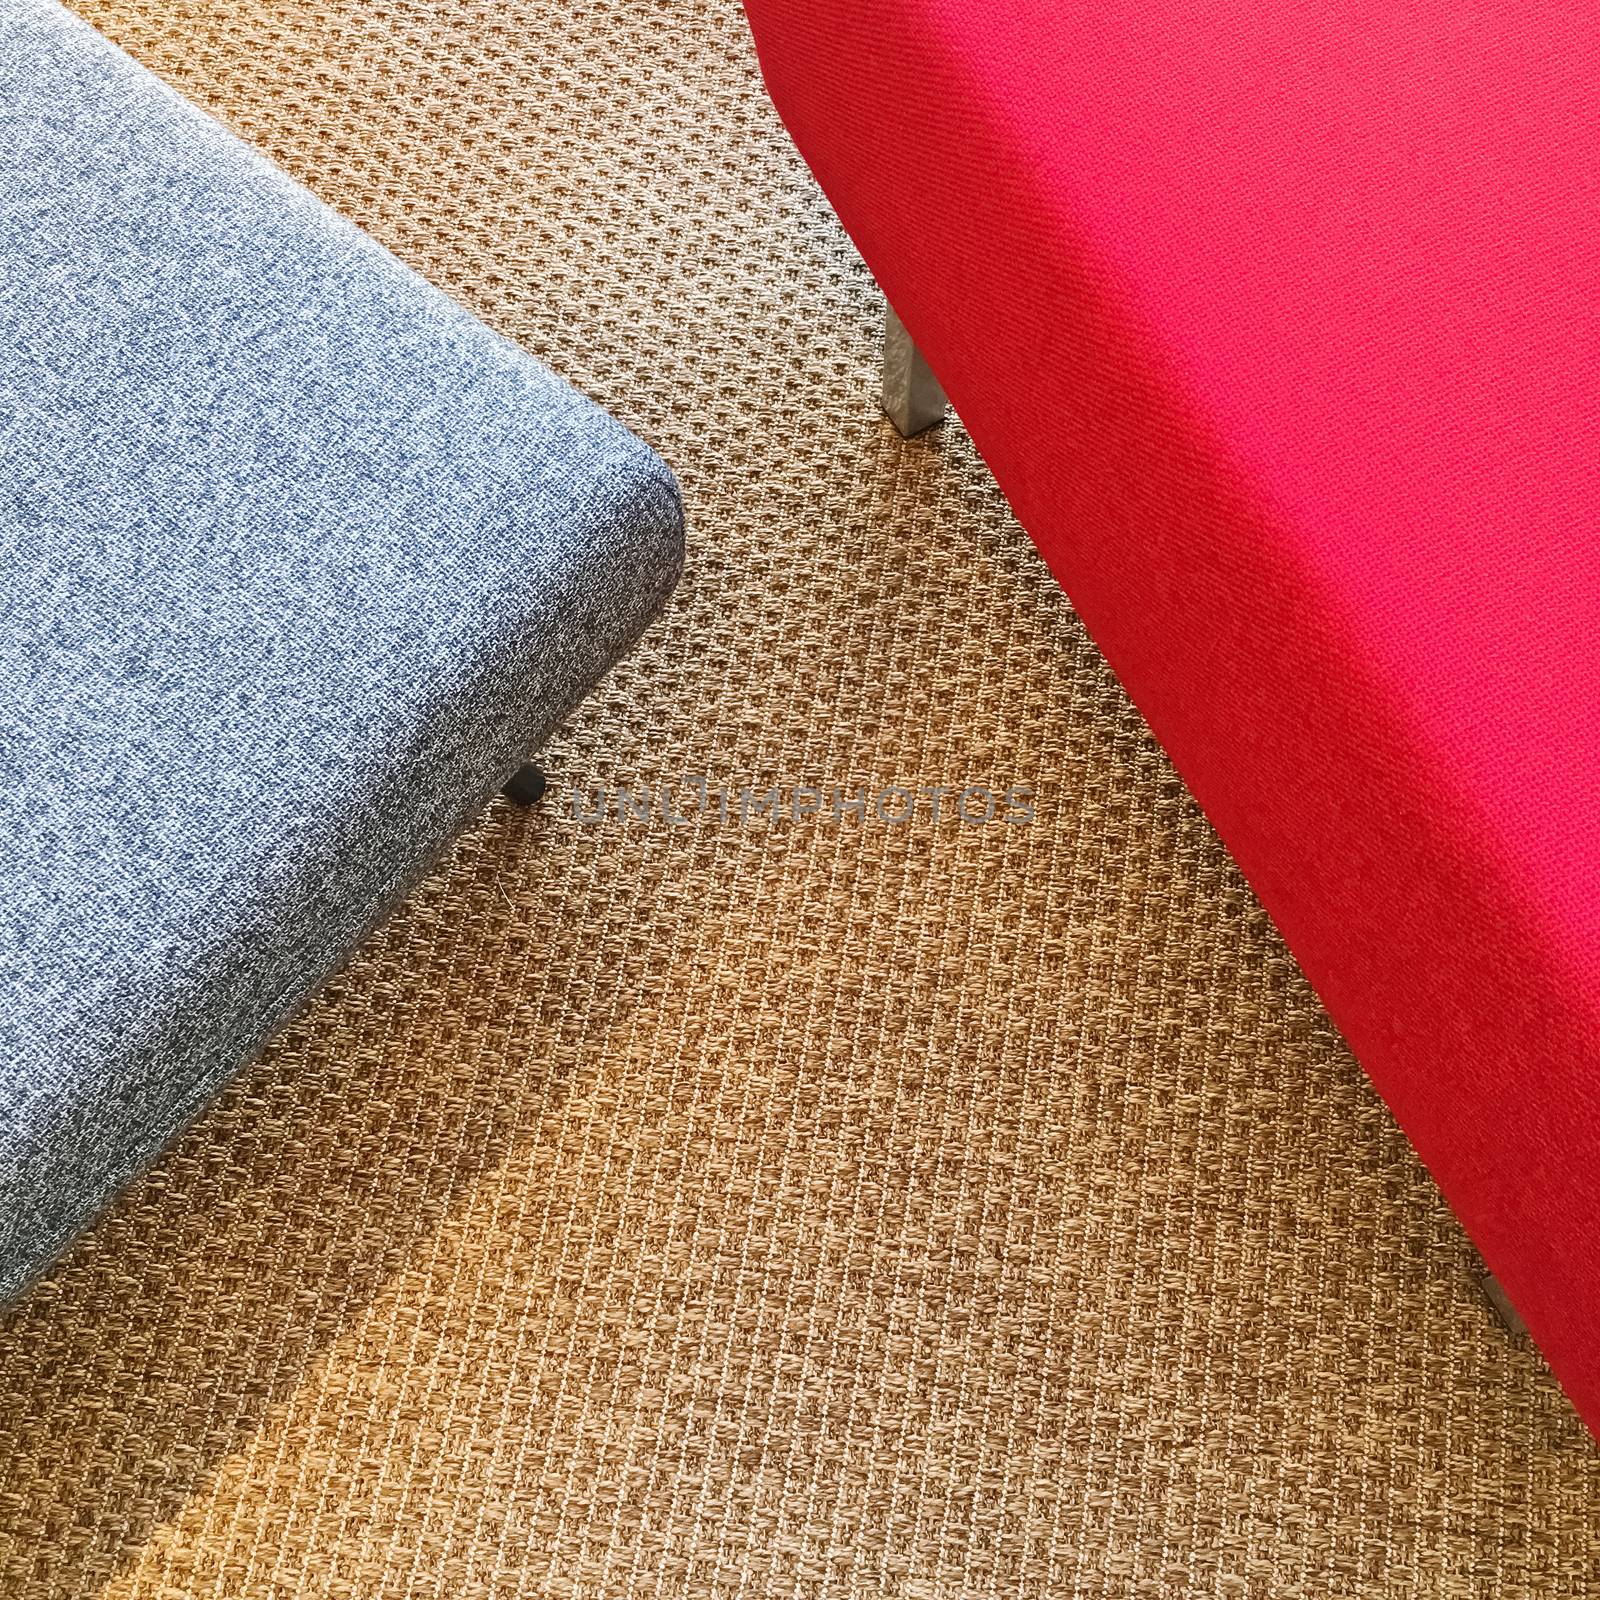 Red and gray seats on carpet floor. Modern furniture.